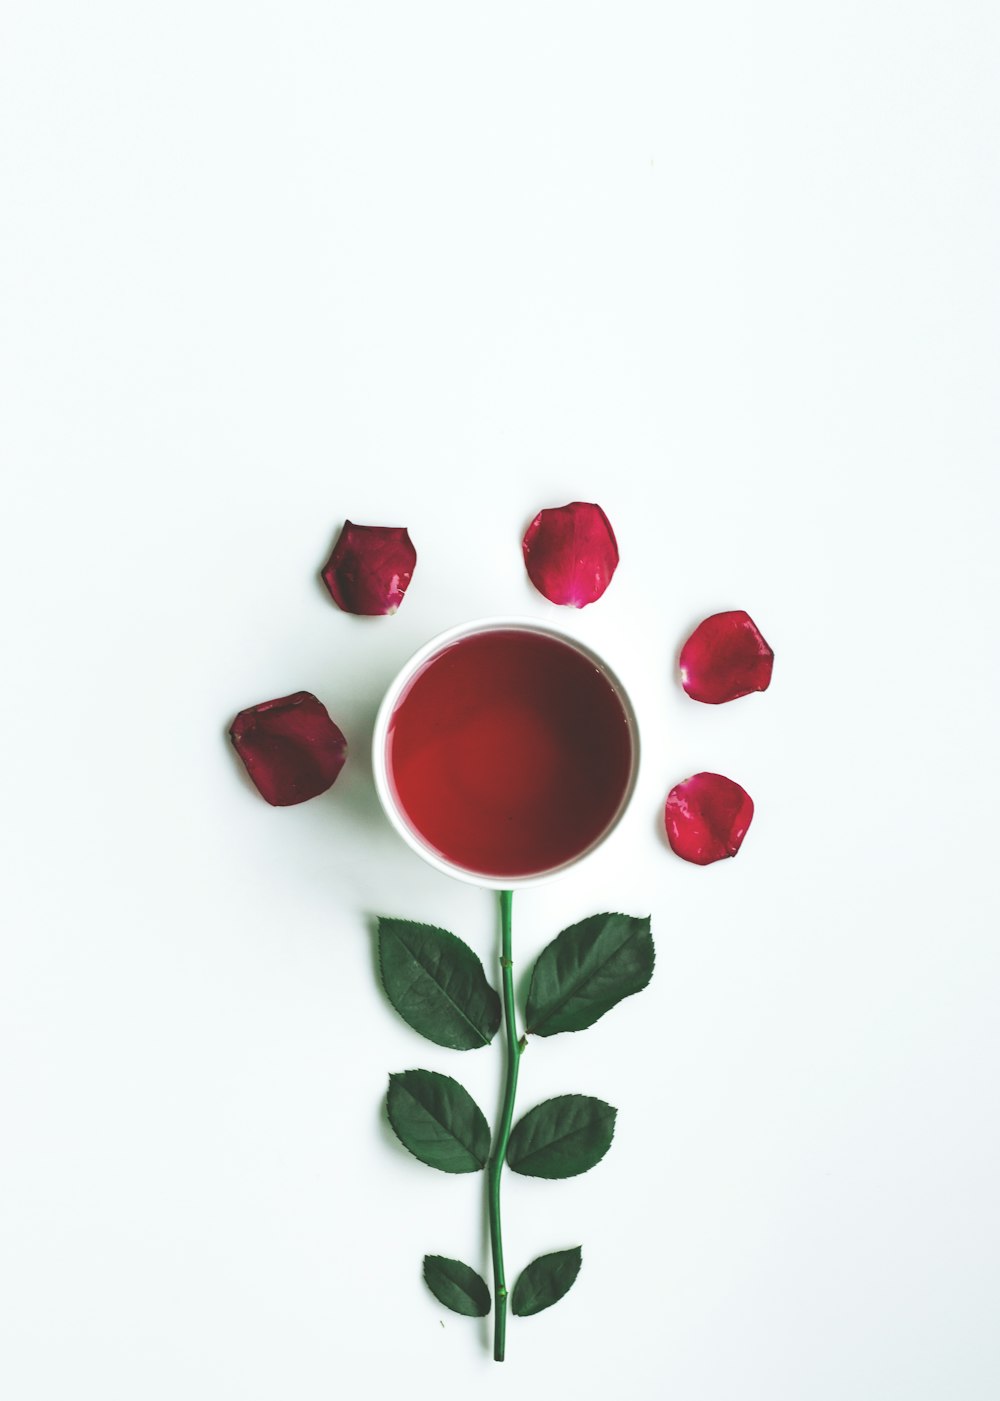 a rose with a cup of tea on a white background